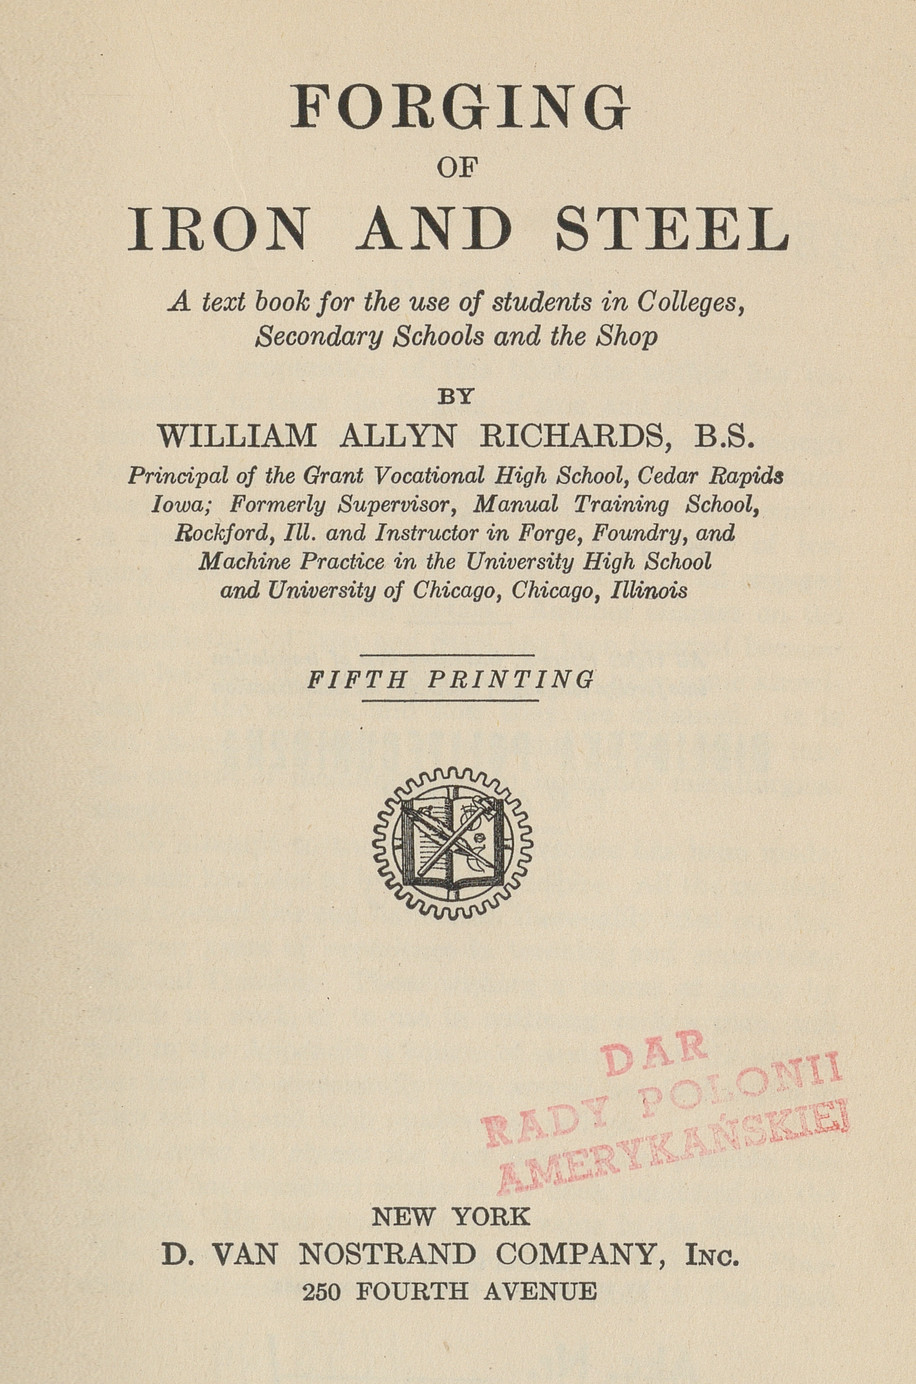 Forging of iron and steel : a text book for the use of students in colleges, secondary schools and the shop